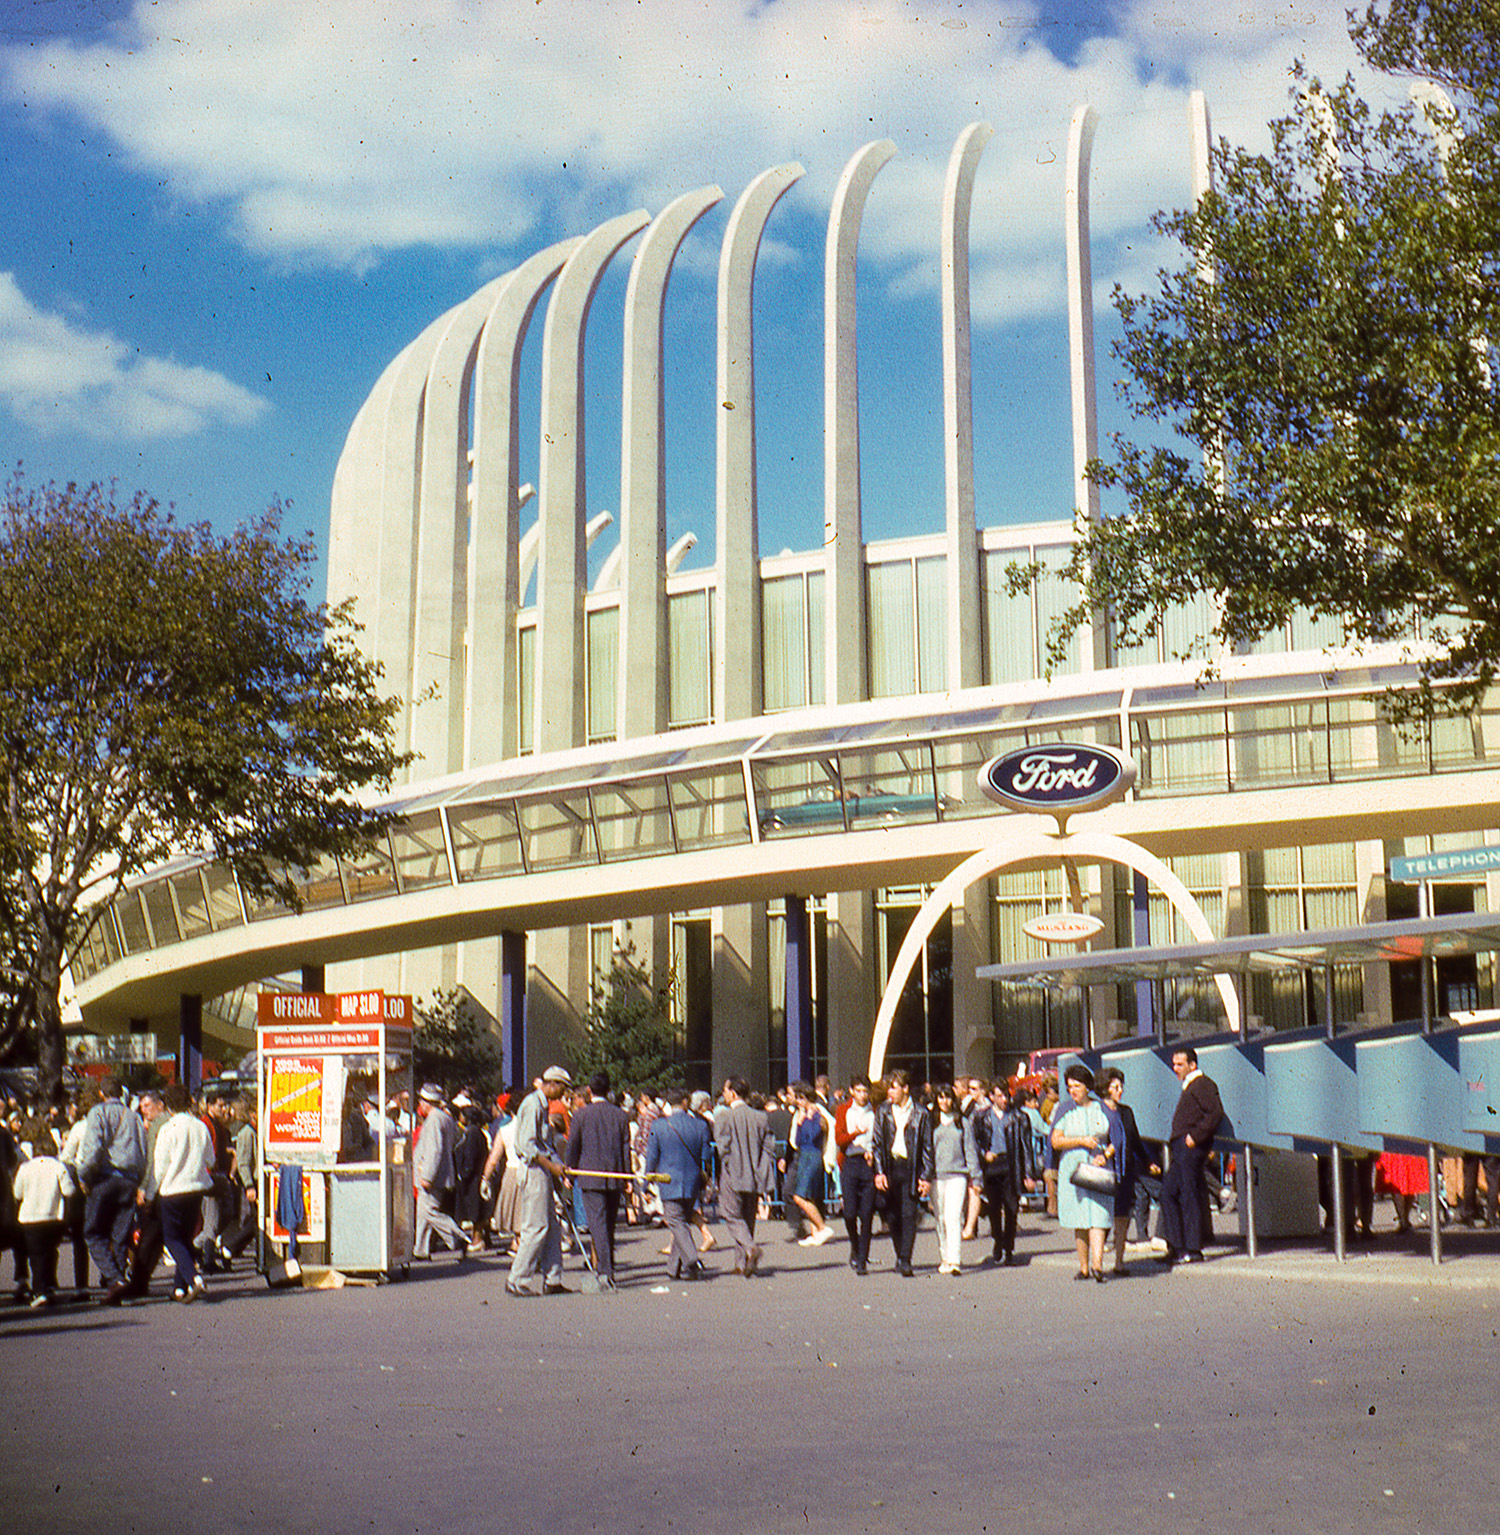 Ford Exhibit where Mustang was revealed at 1964 New York World's Fair